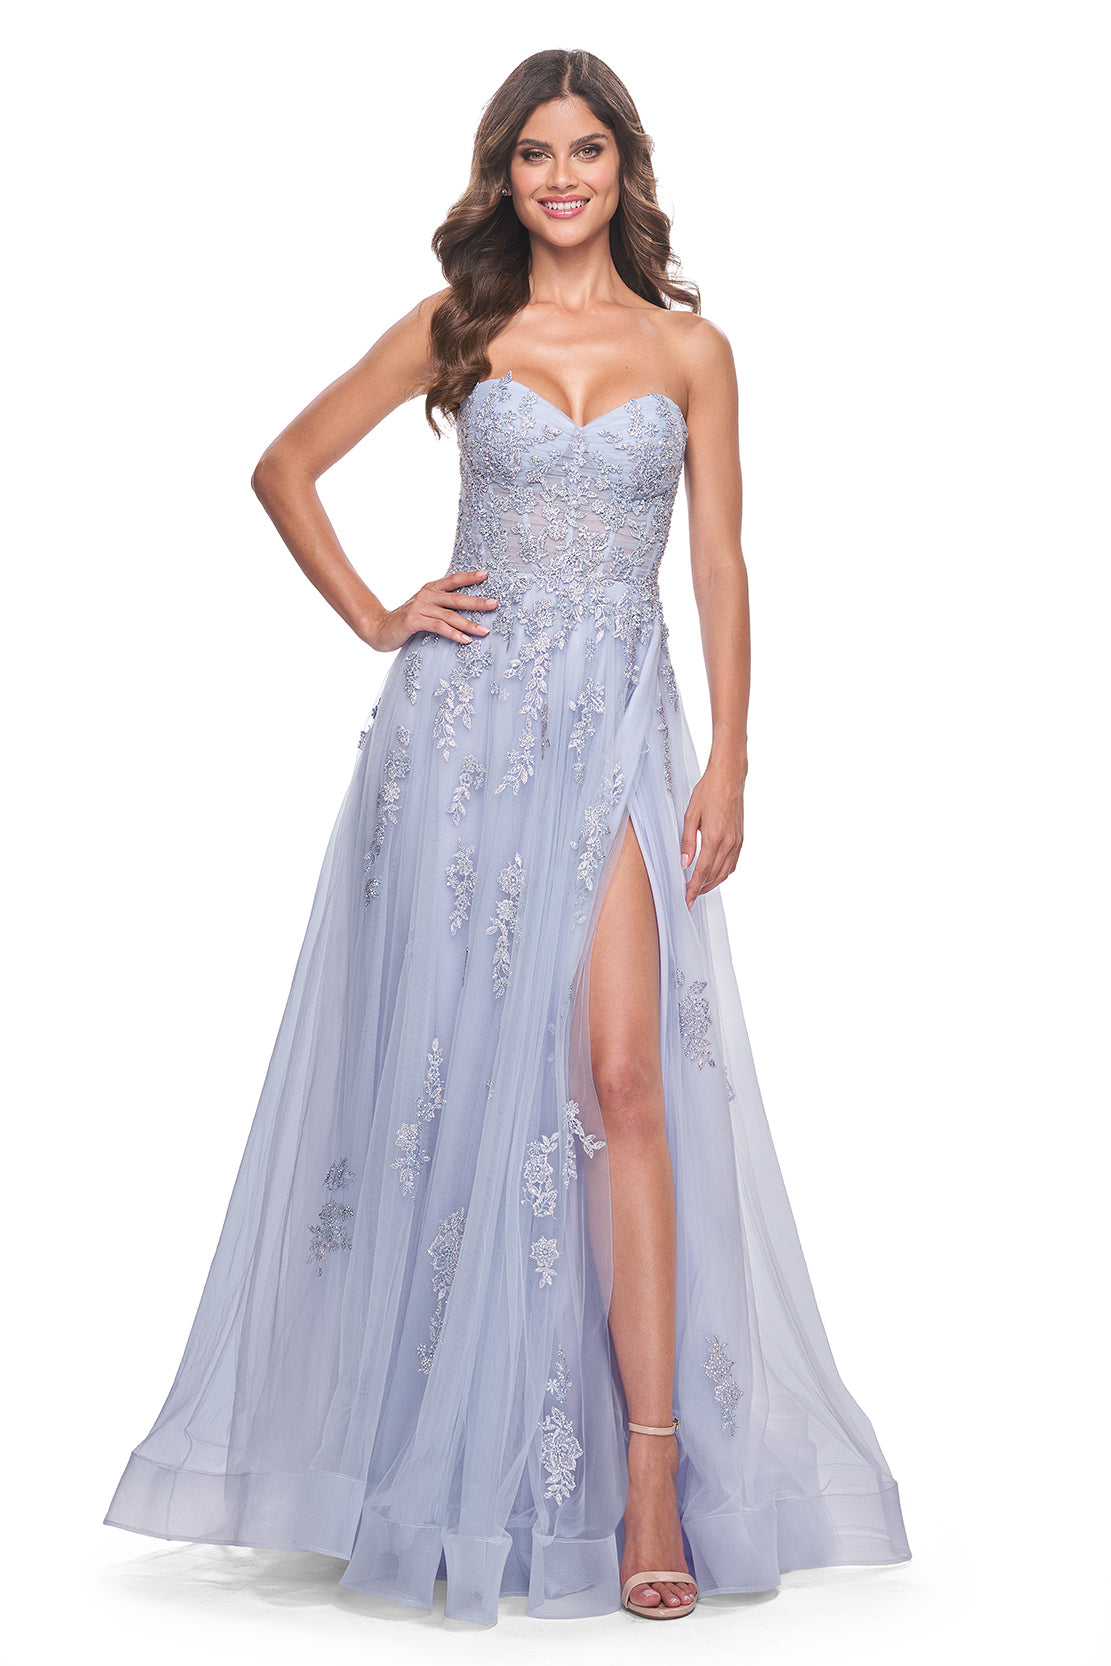 La Femme 32084 A-Line Prom and Quinceañera Gown with Lace Applique - An enchanting A-line gown featuring delicate ruched detail, a lace-up bodice, sweetheart neckline, and intricate lace applique for a statement look at prom or quinceañera celebrations. The dress in the picture is light periwinkle.